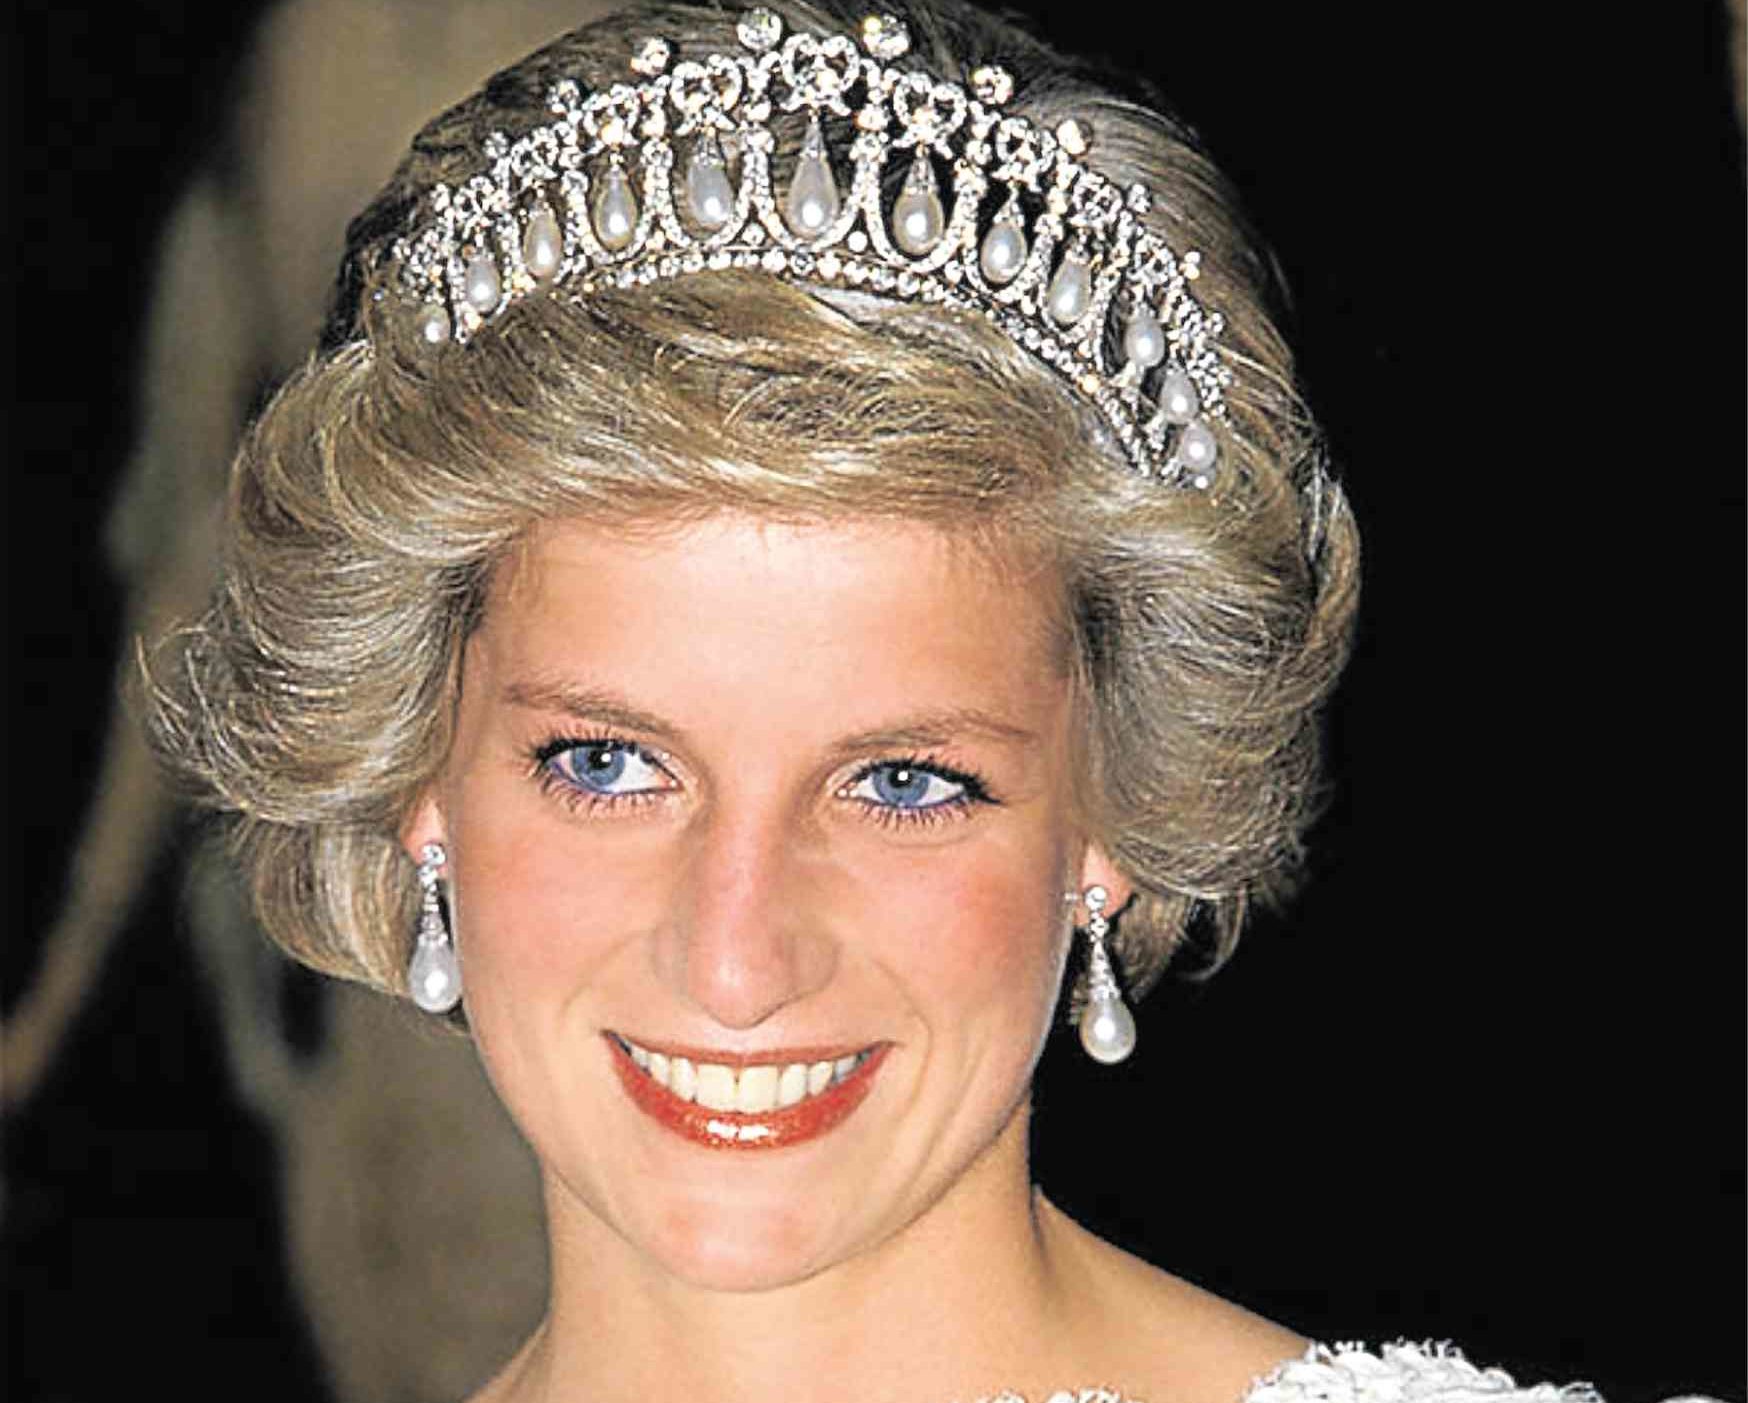 'Deceitful' Diana interview 'should never be aired again’ – Prince William